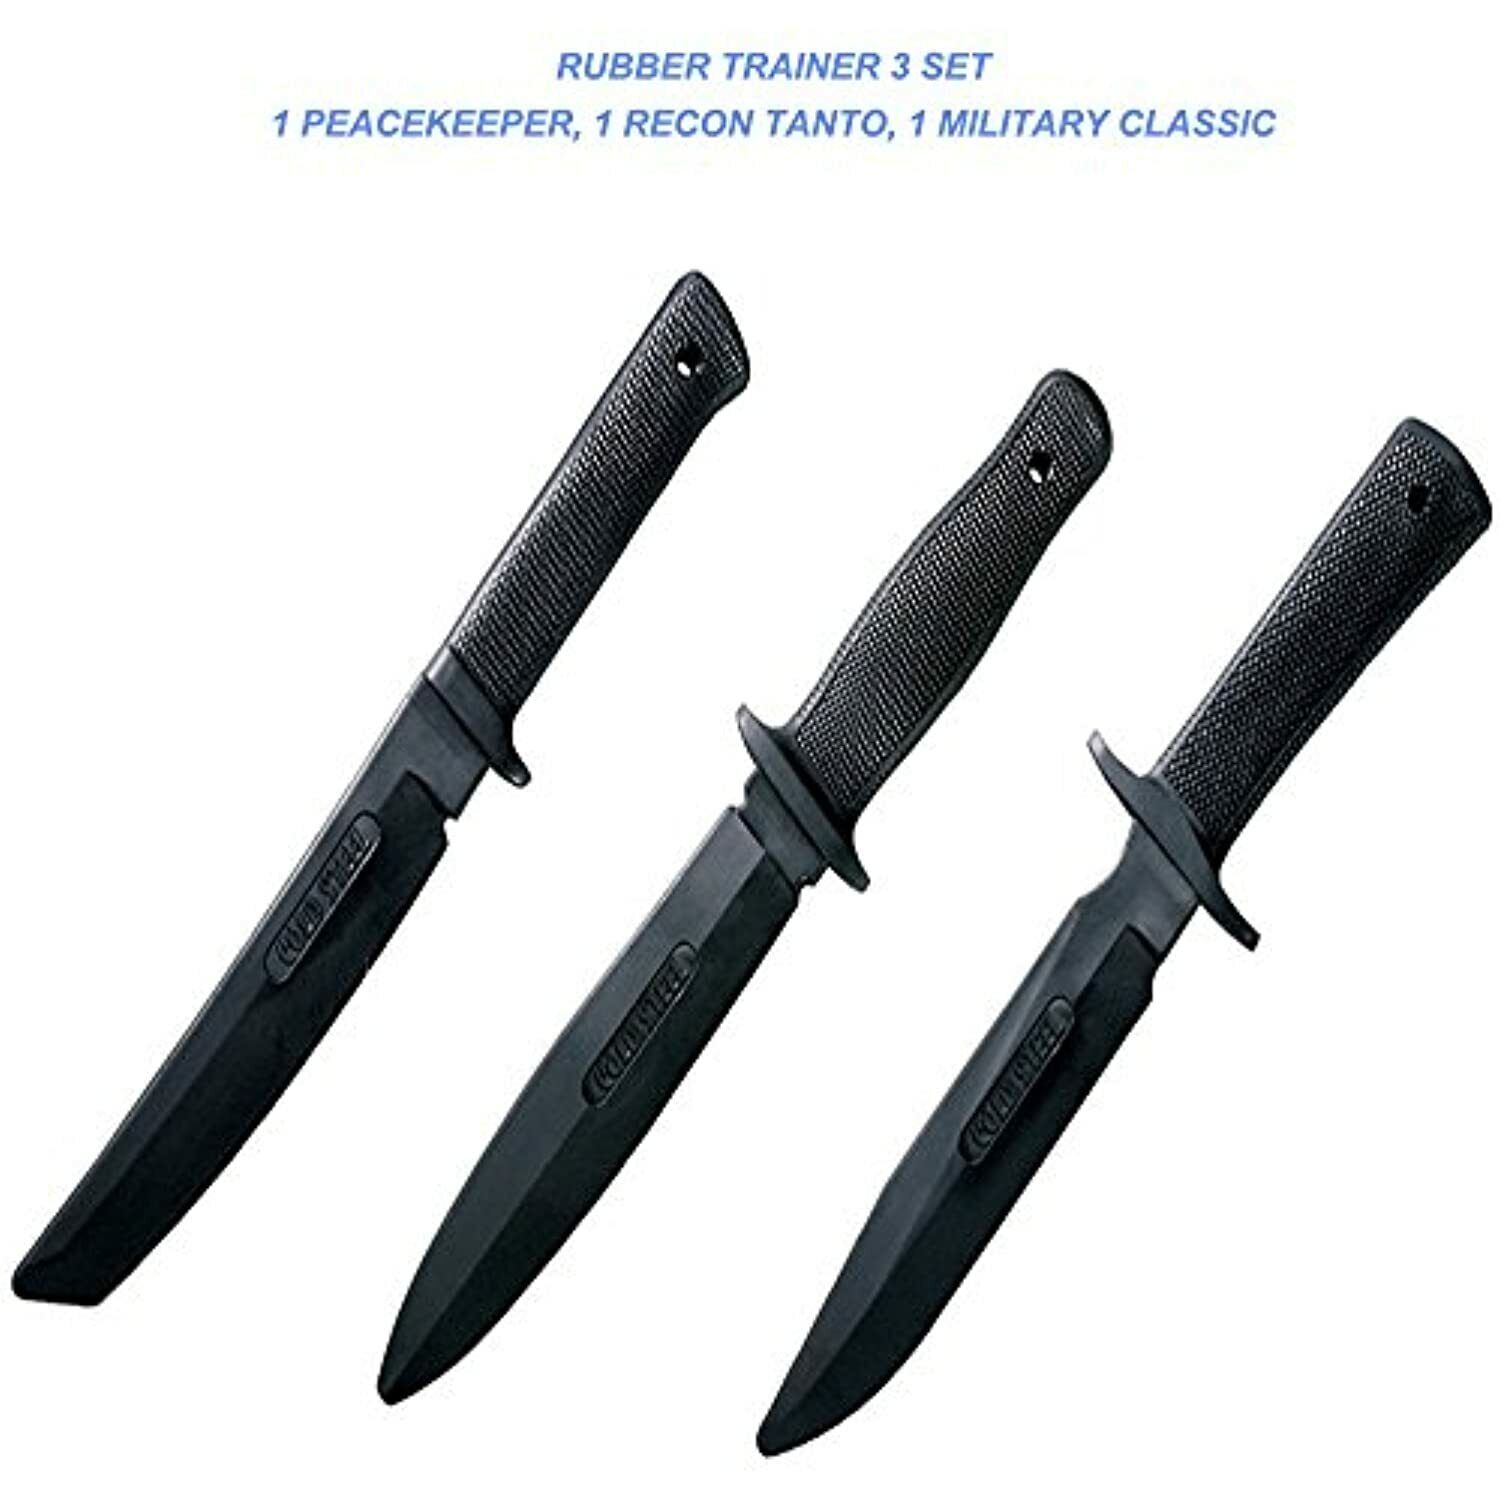 Cold Steel Rubber Training practice Knife Knives 3 Set